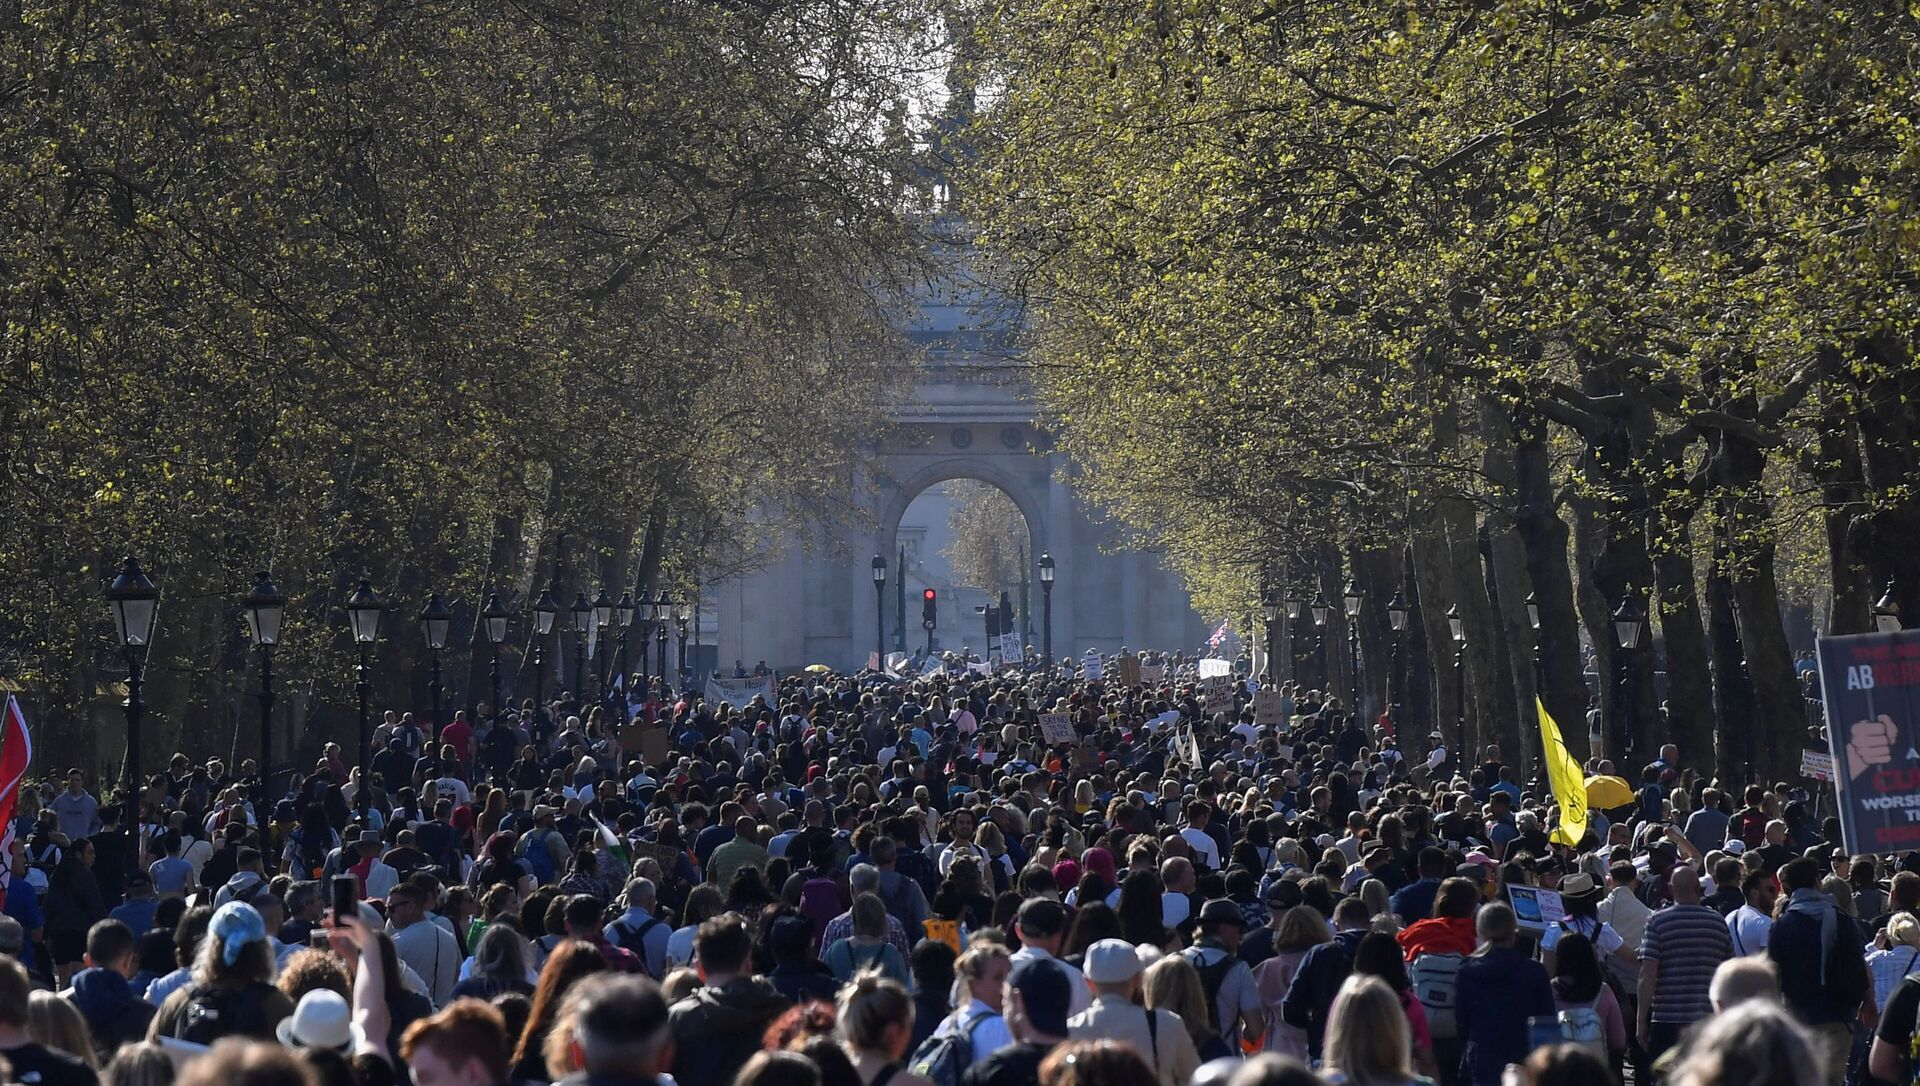 Demonstrators march during an anti-lockdown 'Unite for Freedom' protest, amid the spread of the coronavirus disease (COVID-19), in London, Britain, April 24, 2021 - Sputnik International, 1920, 27.04.2021